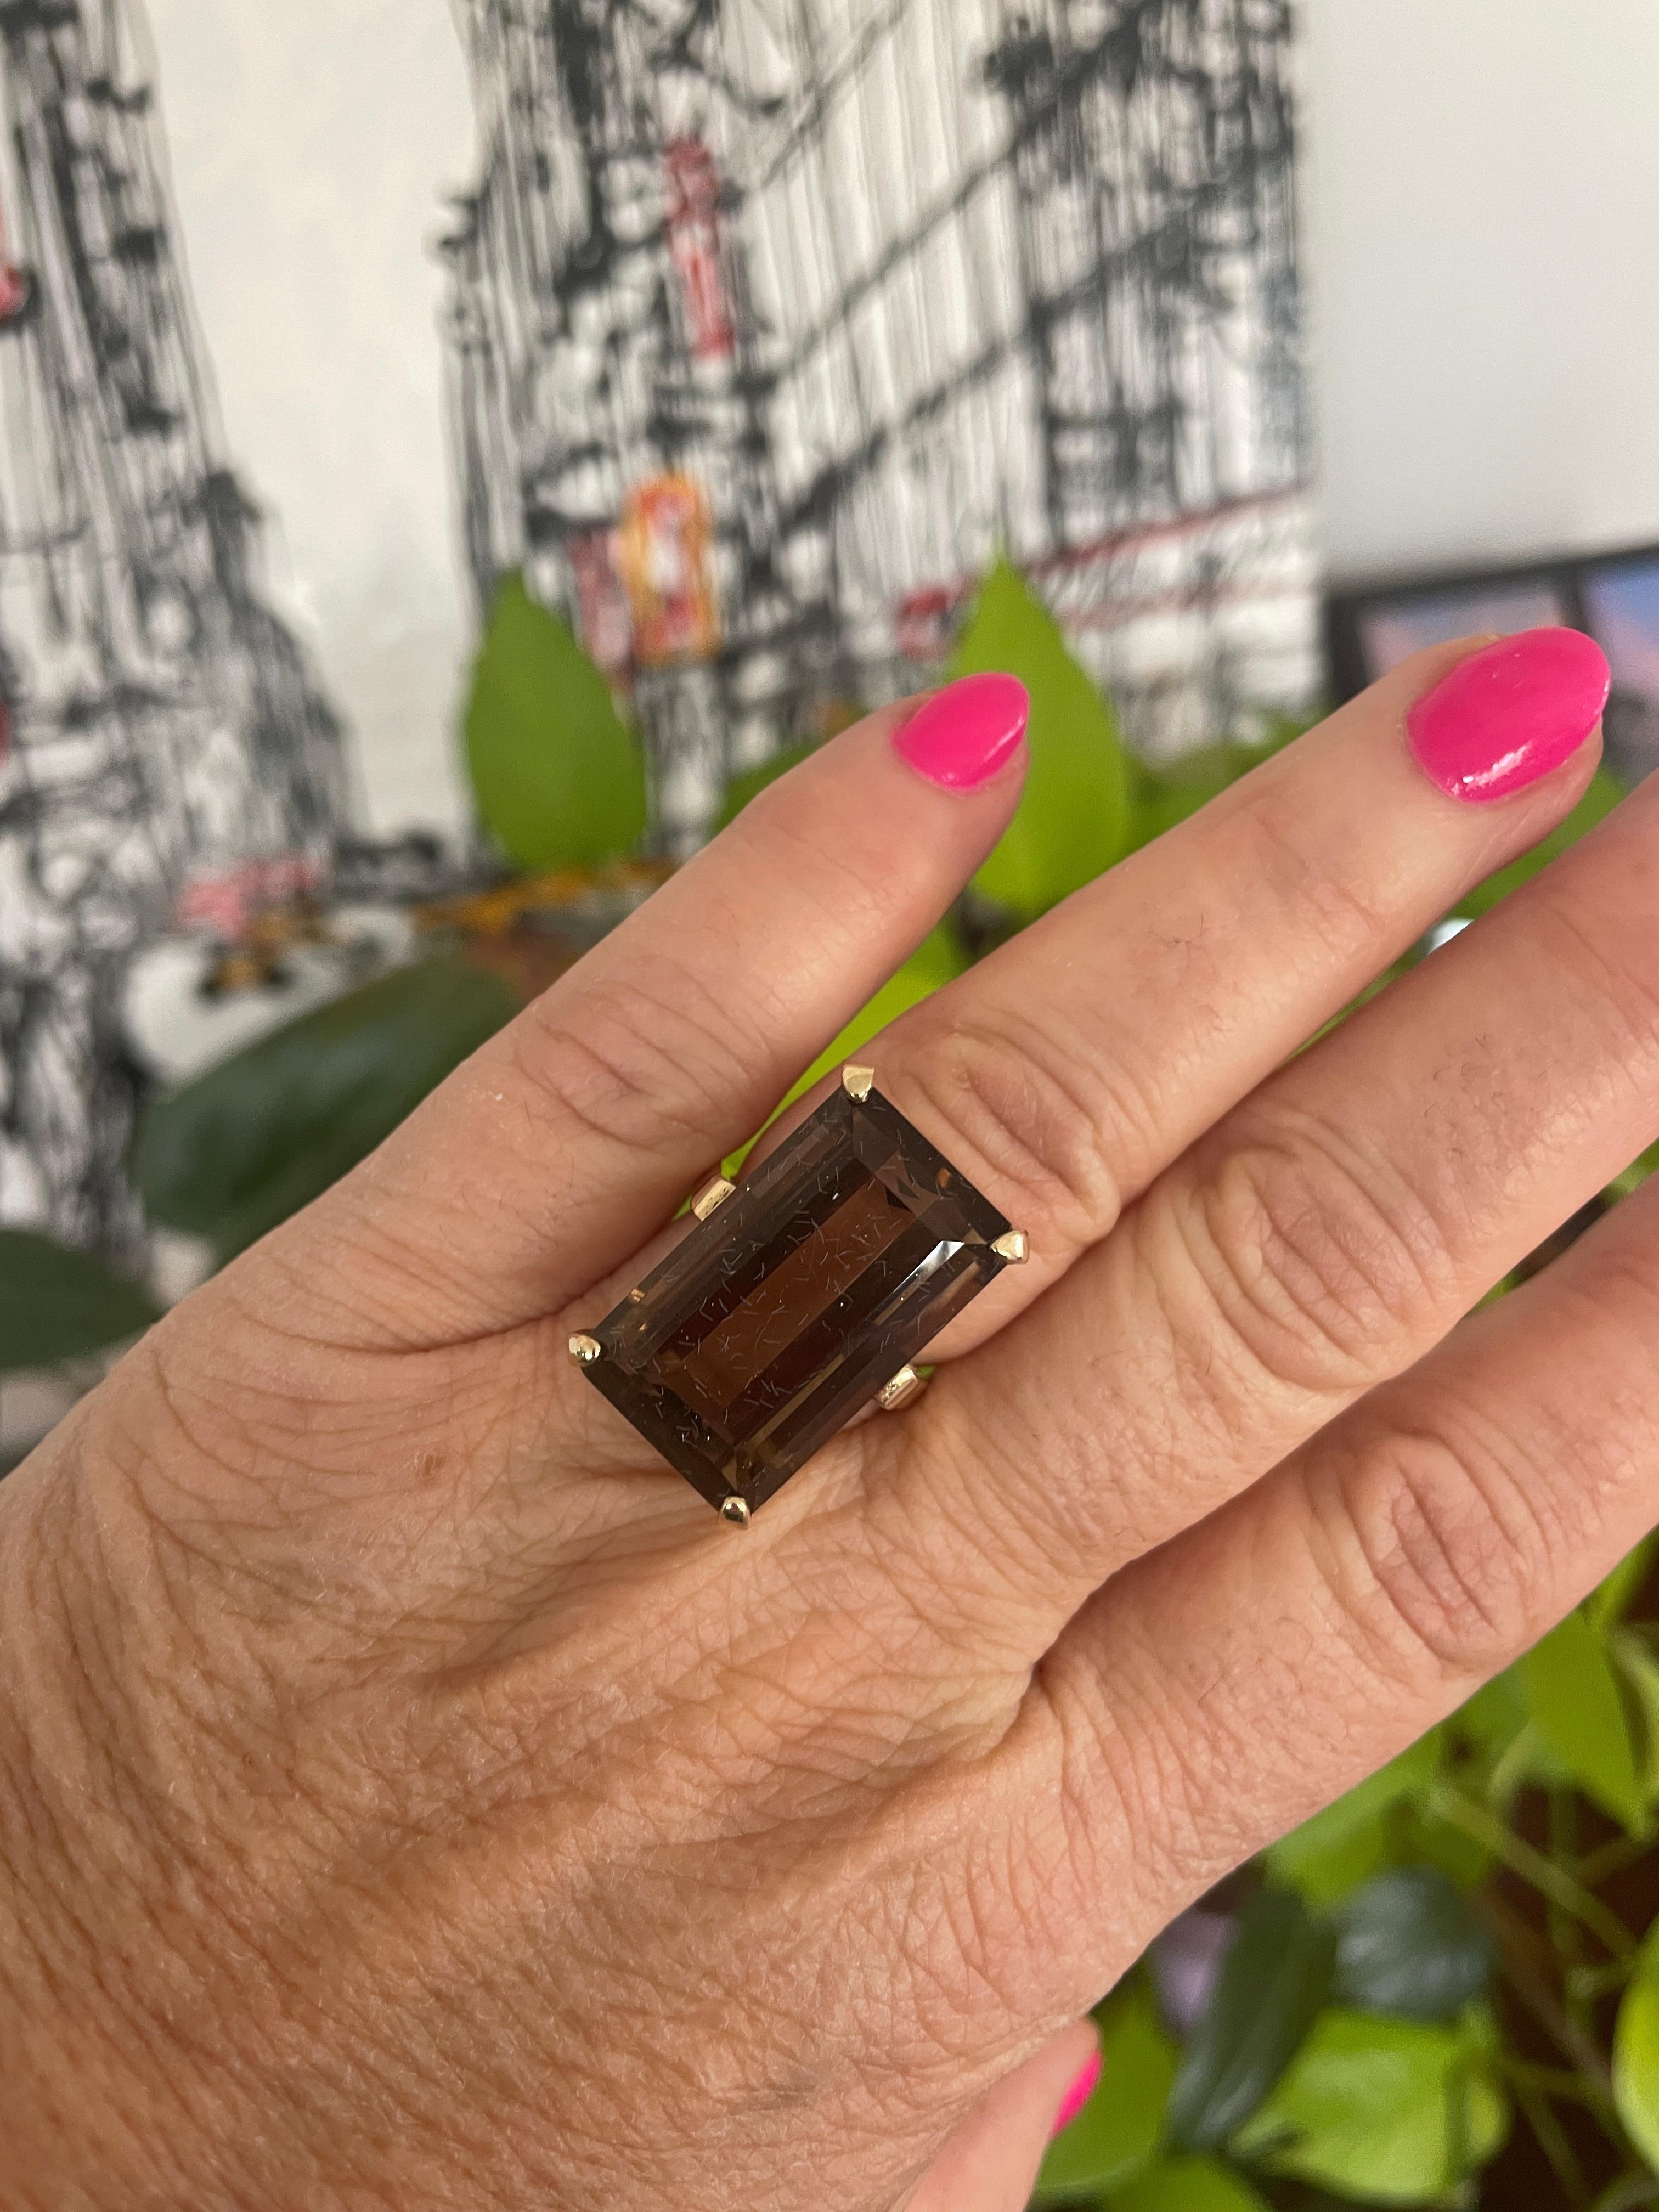 Massive Emerald cut Smokey Quartz ring set in 14K gold This is elegant and sophisticated. Ring is a size 8 and can be sized up or down by us or by your jeweler. This is out of a massive collection of Hopi, Zuni, Navajo, Southwestern, sterling